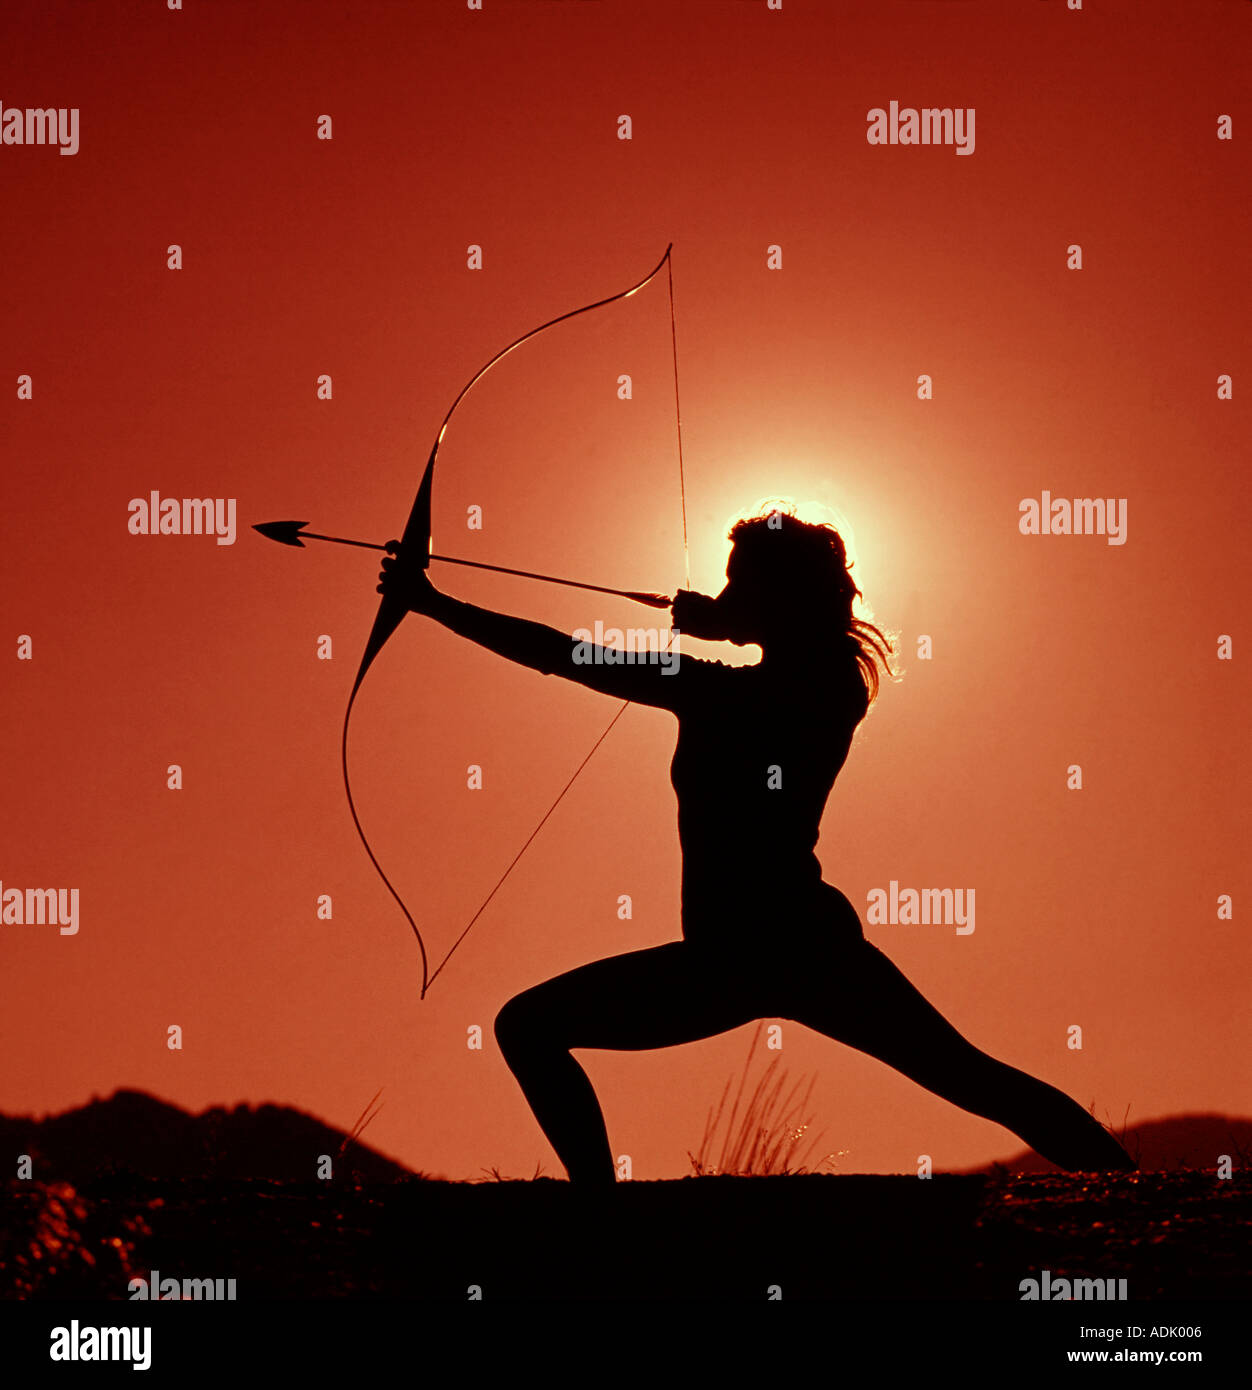 sunset silhouette of dramatic and agressive pose of young woman aiming ADK006